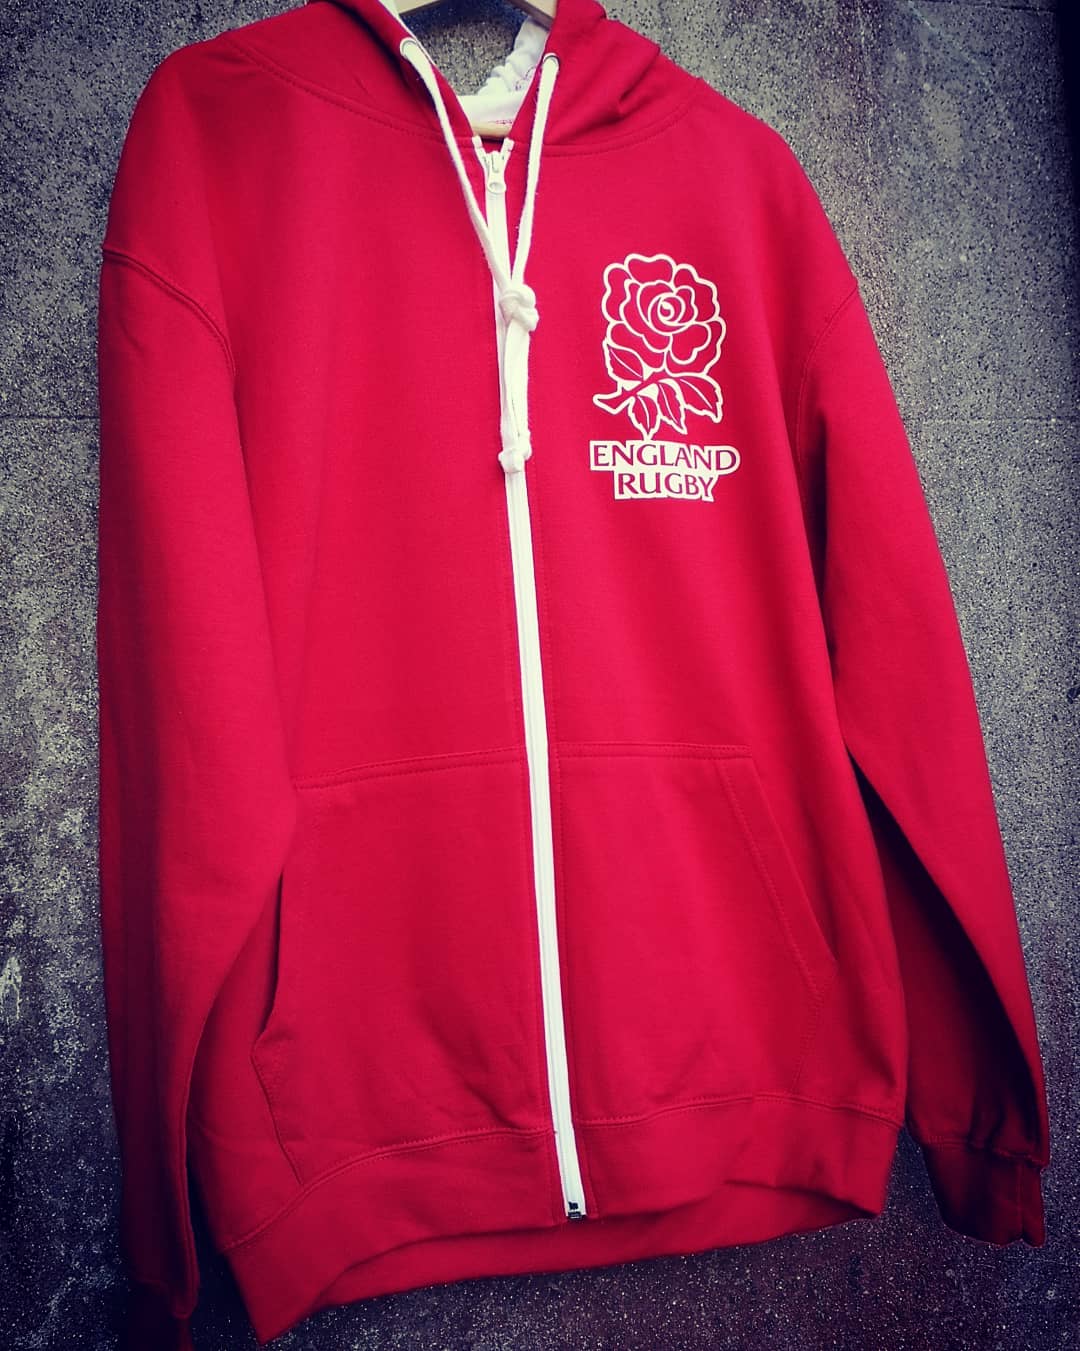 England Rugby World Cup Supporters Zip up Hoodie top S-XXL